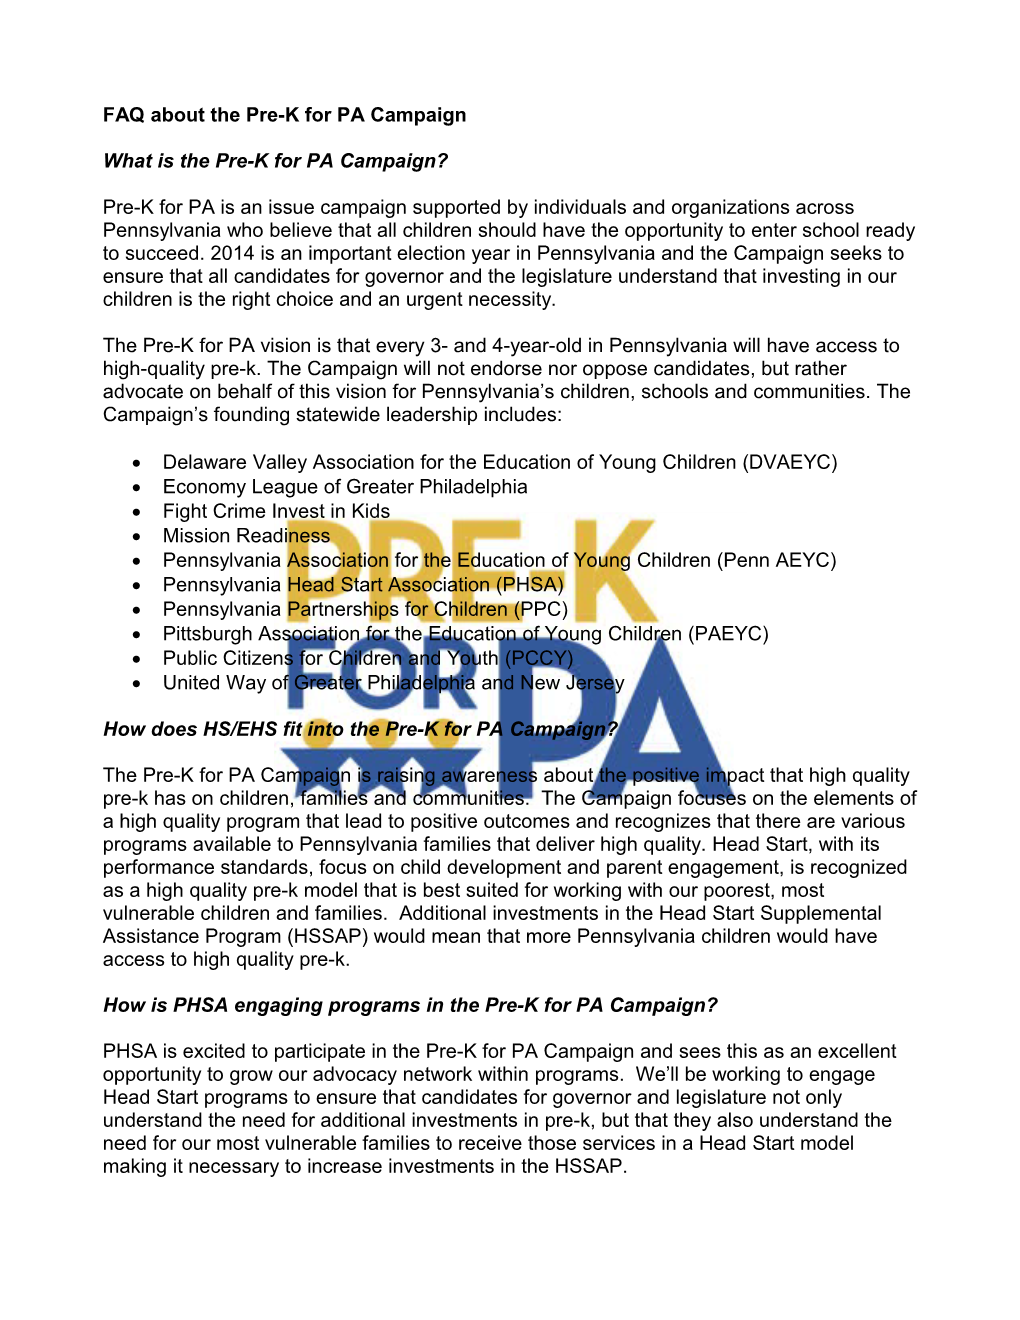 FAQ About the Pre-K for PA Campaign